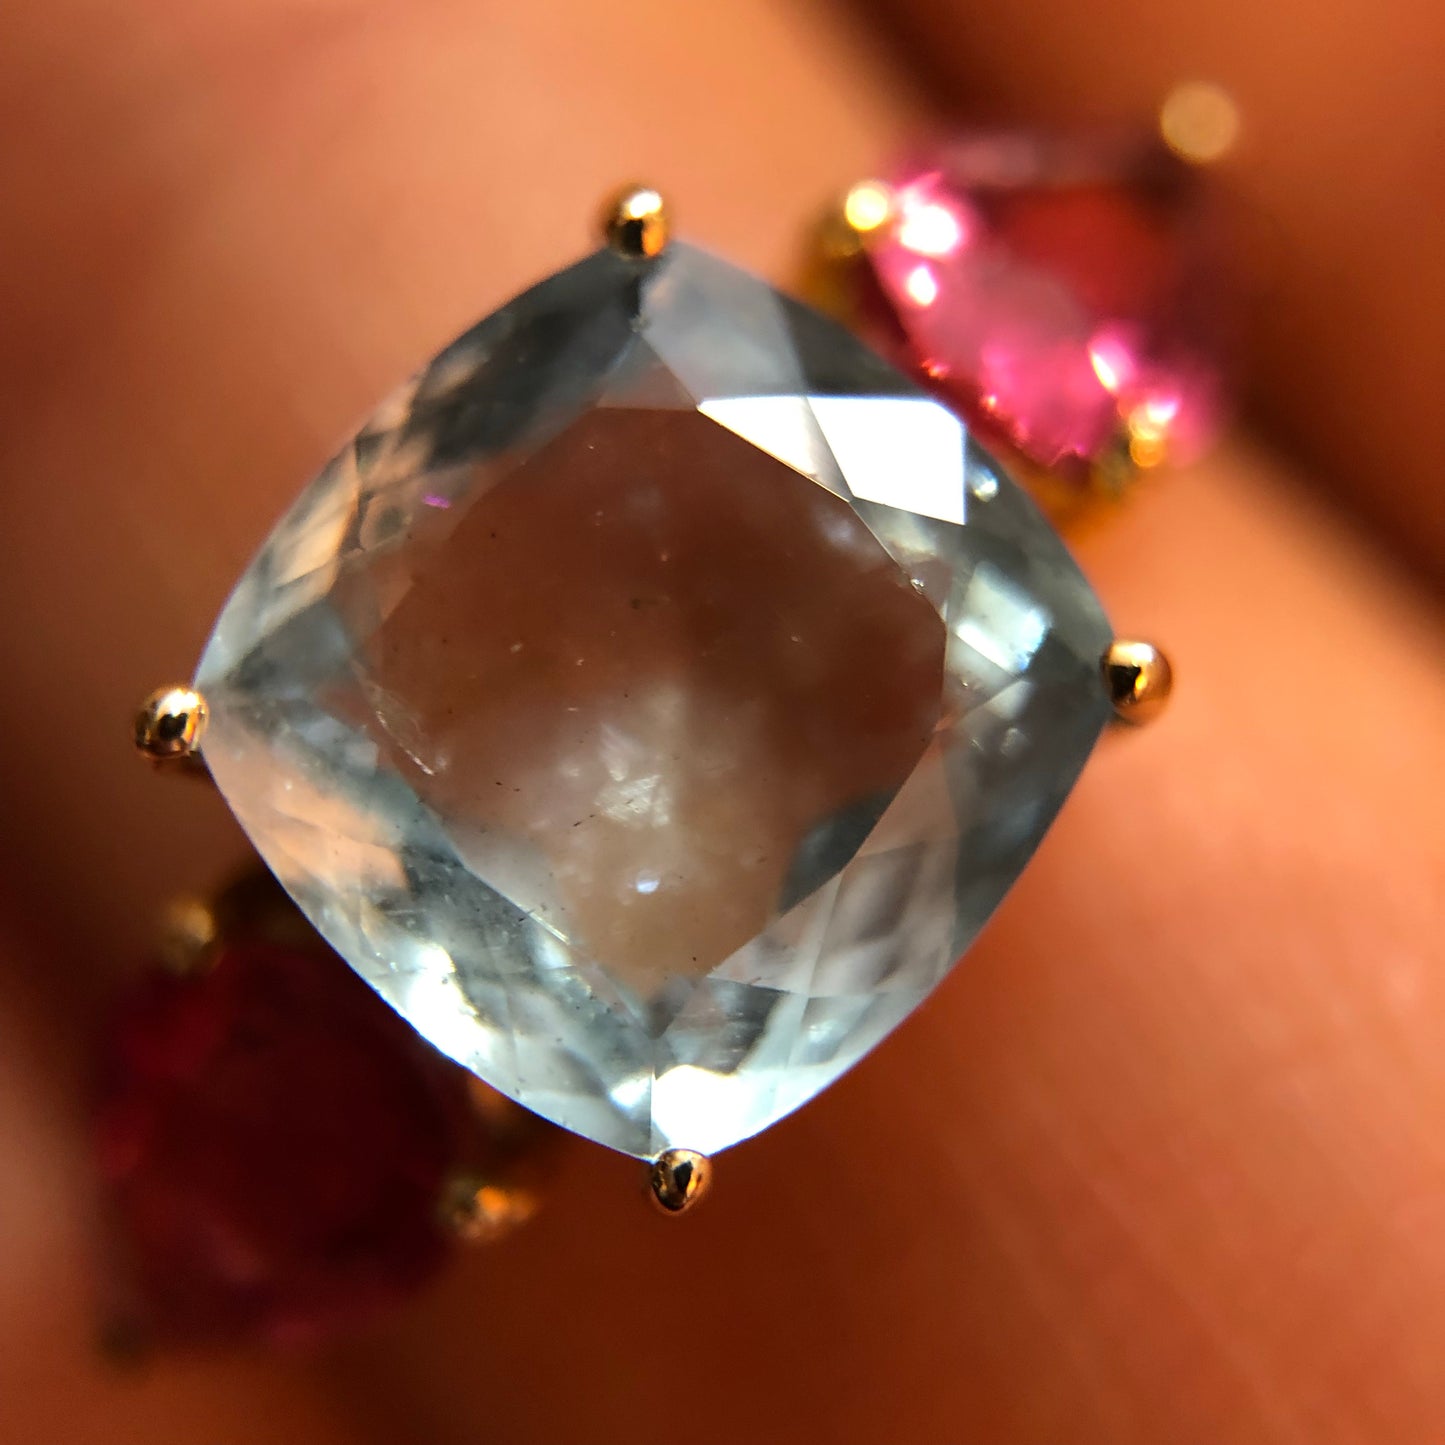 Load image into Gallery viewer, Aquamarine Ring with Pink Tourmalines
